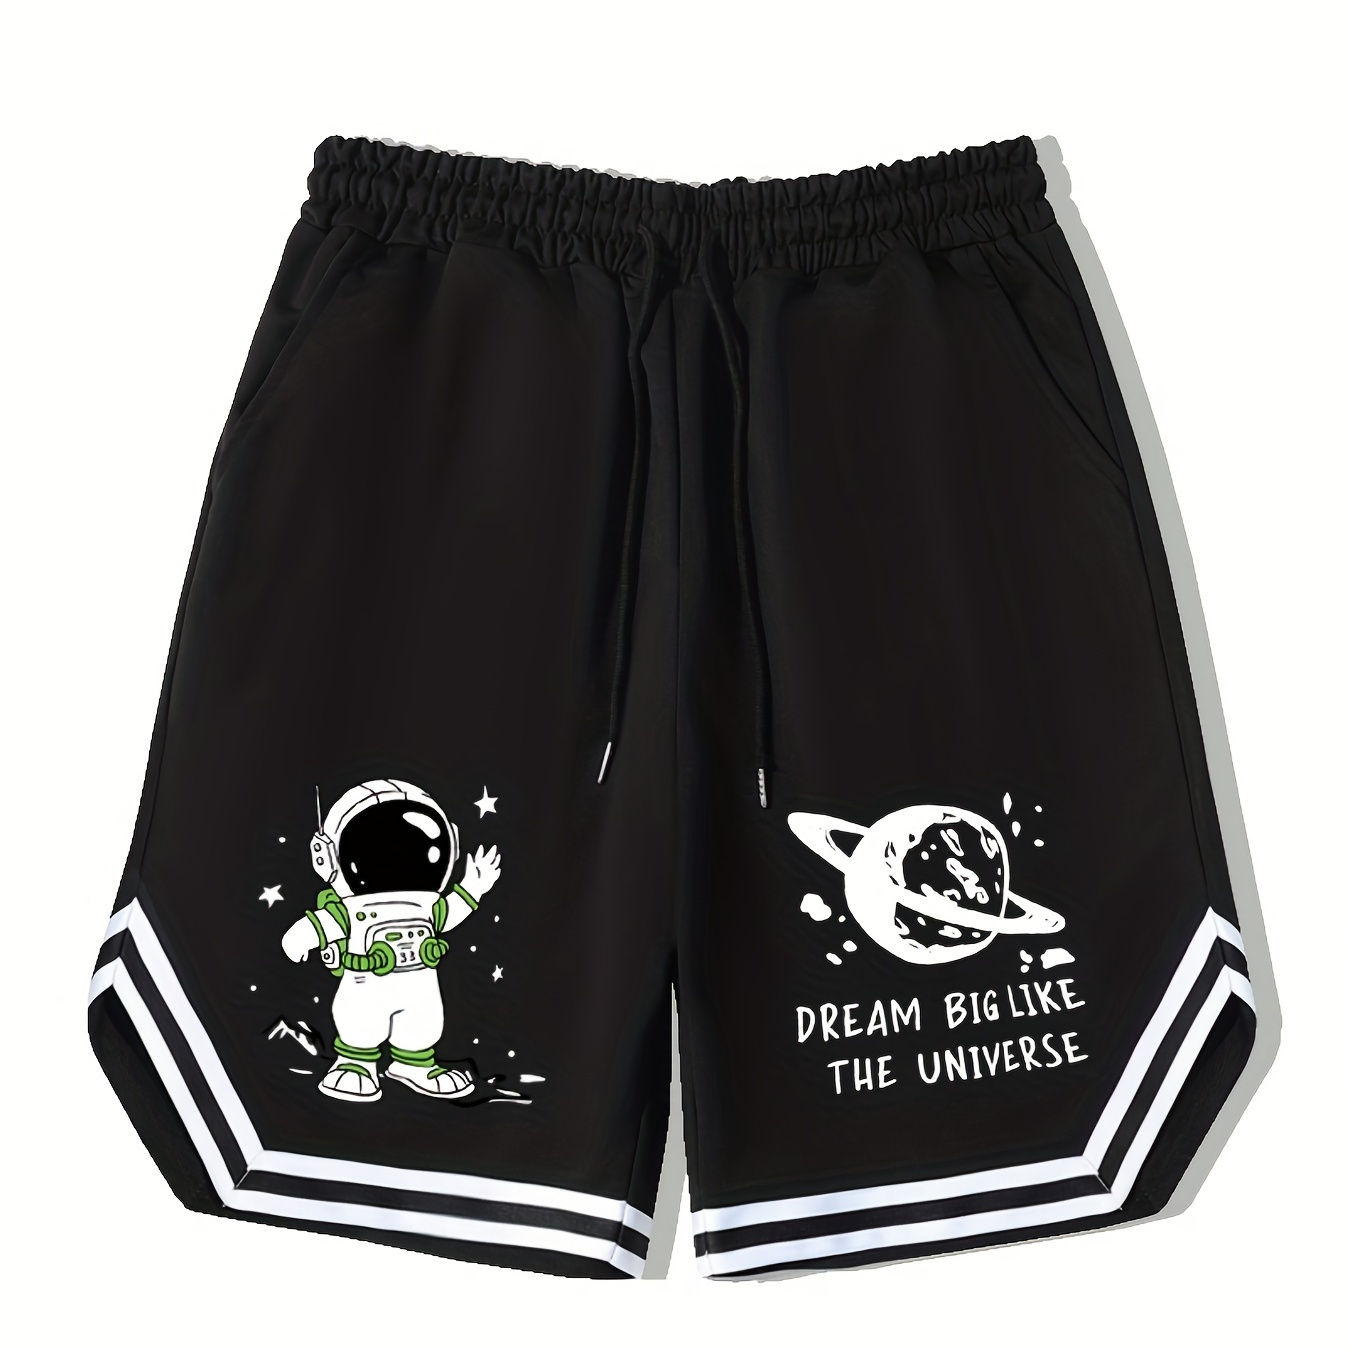 

"dream Big Like The Universe", Men's Astronaut Graphic Basketball Shorts, Casual Slightly Stretch Breathable Drawstring Shorts, Men's Clothing For Summer Outdoor